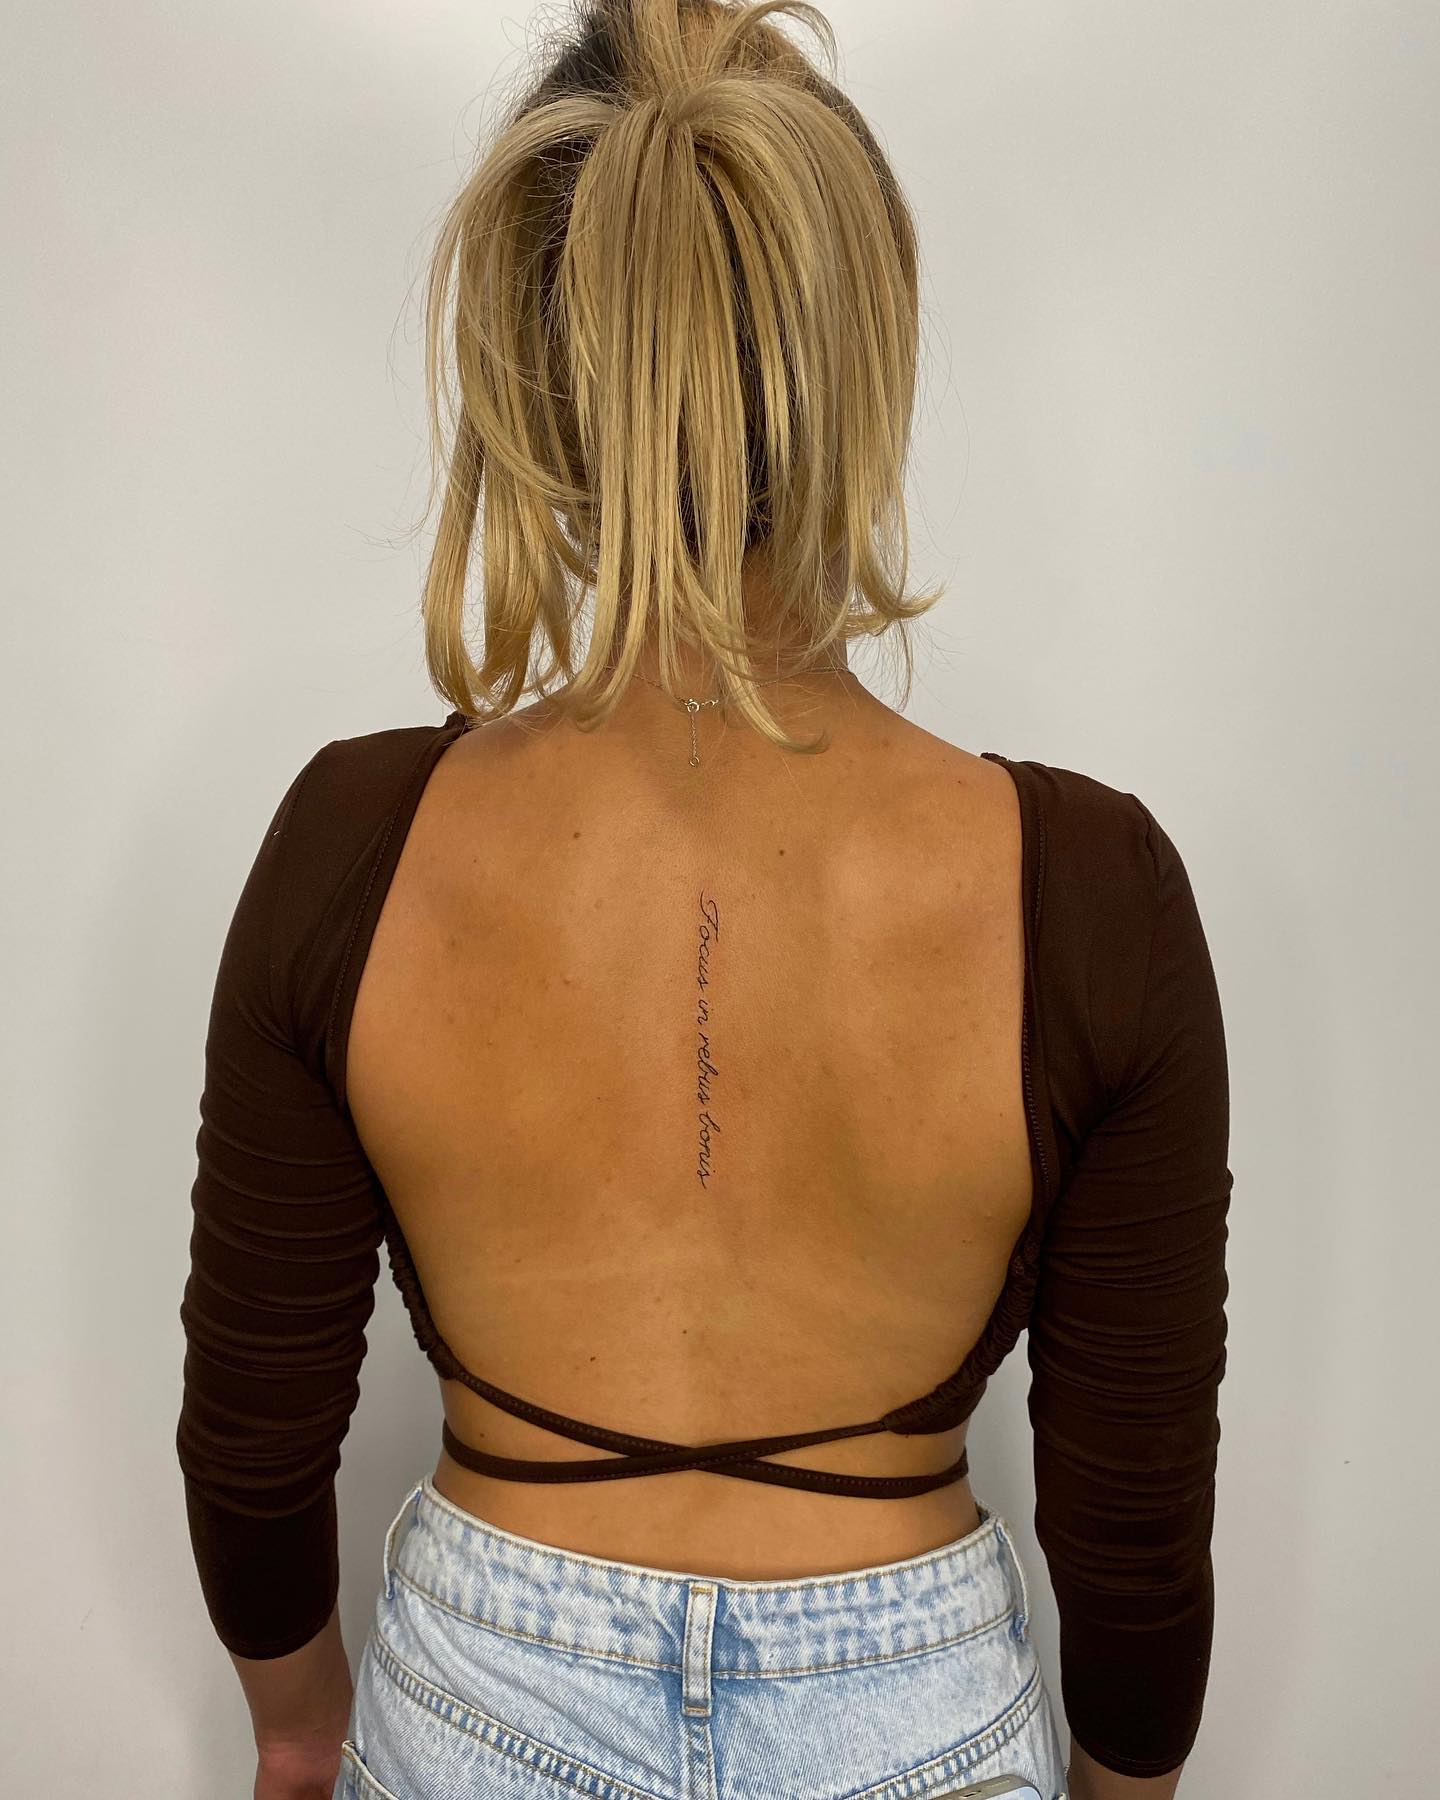 A small and simple back tattoo across your spine will make you look like a feminine lady.